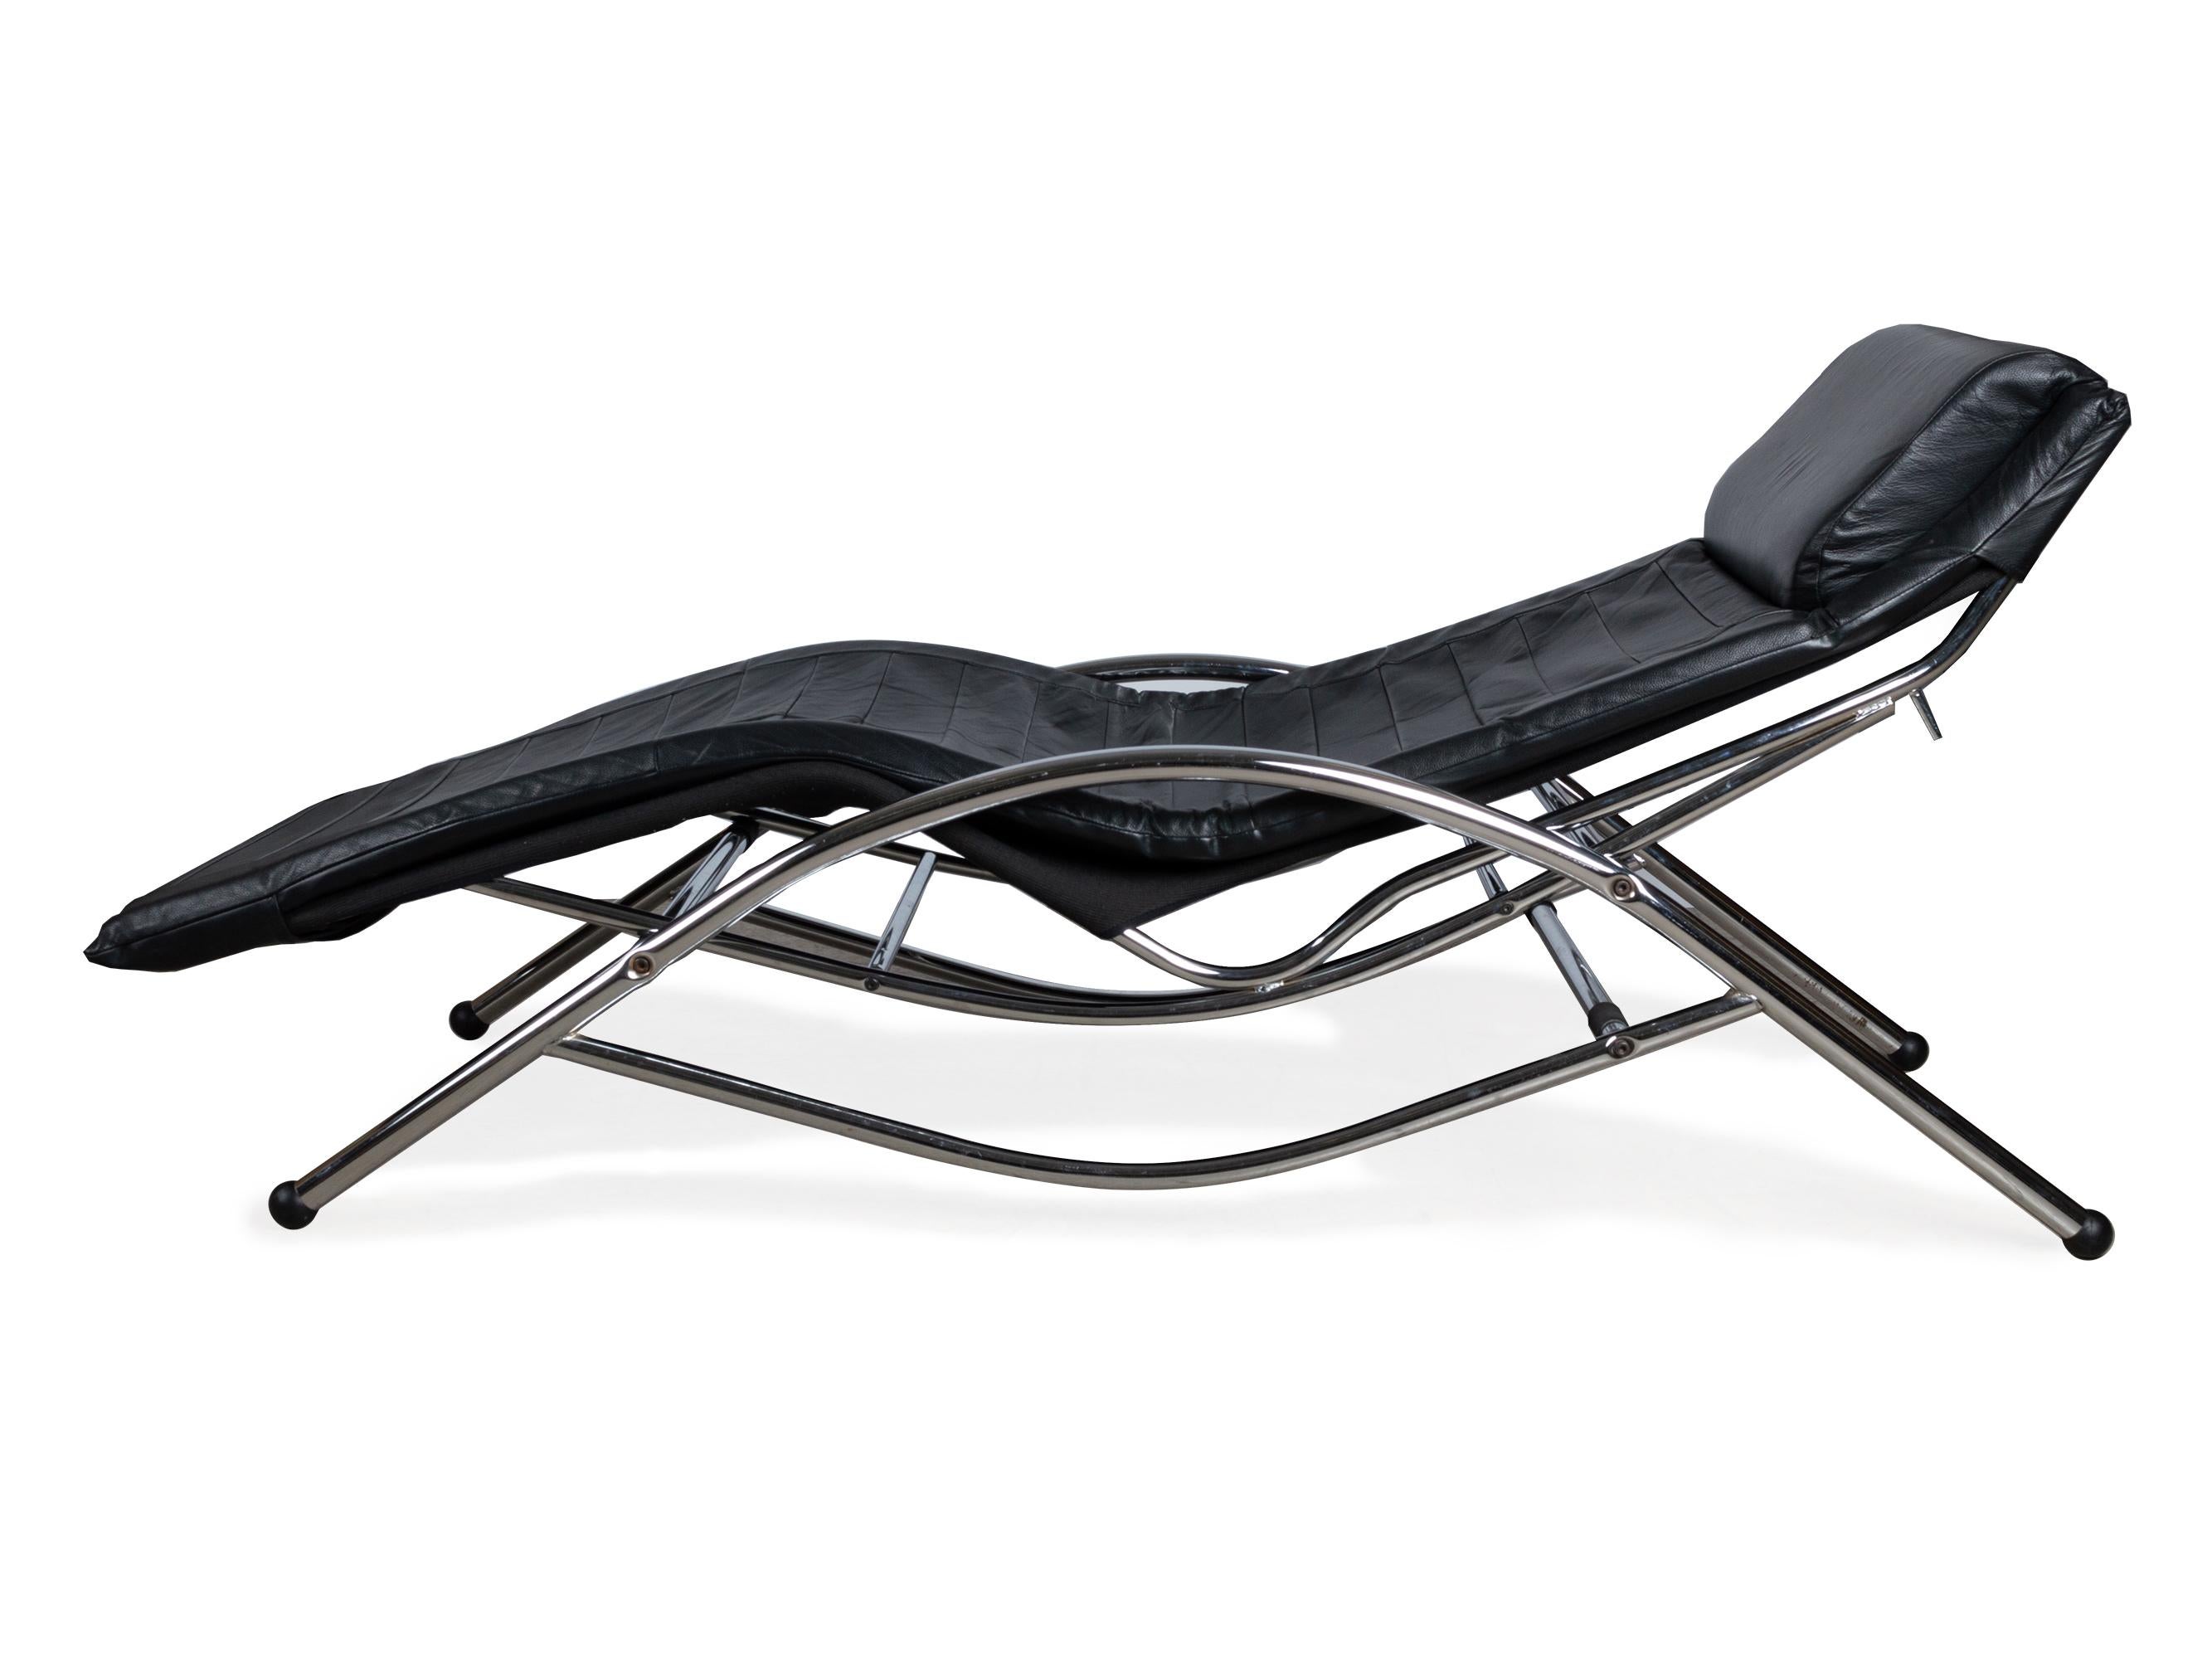 Chaise longue in chromed tubular steel and black leather, with a tilting mechanism. The chrome tubular frame can be slid in various positions on the base, changing the seating position from a relaxed seating position to a sleeping position.